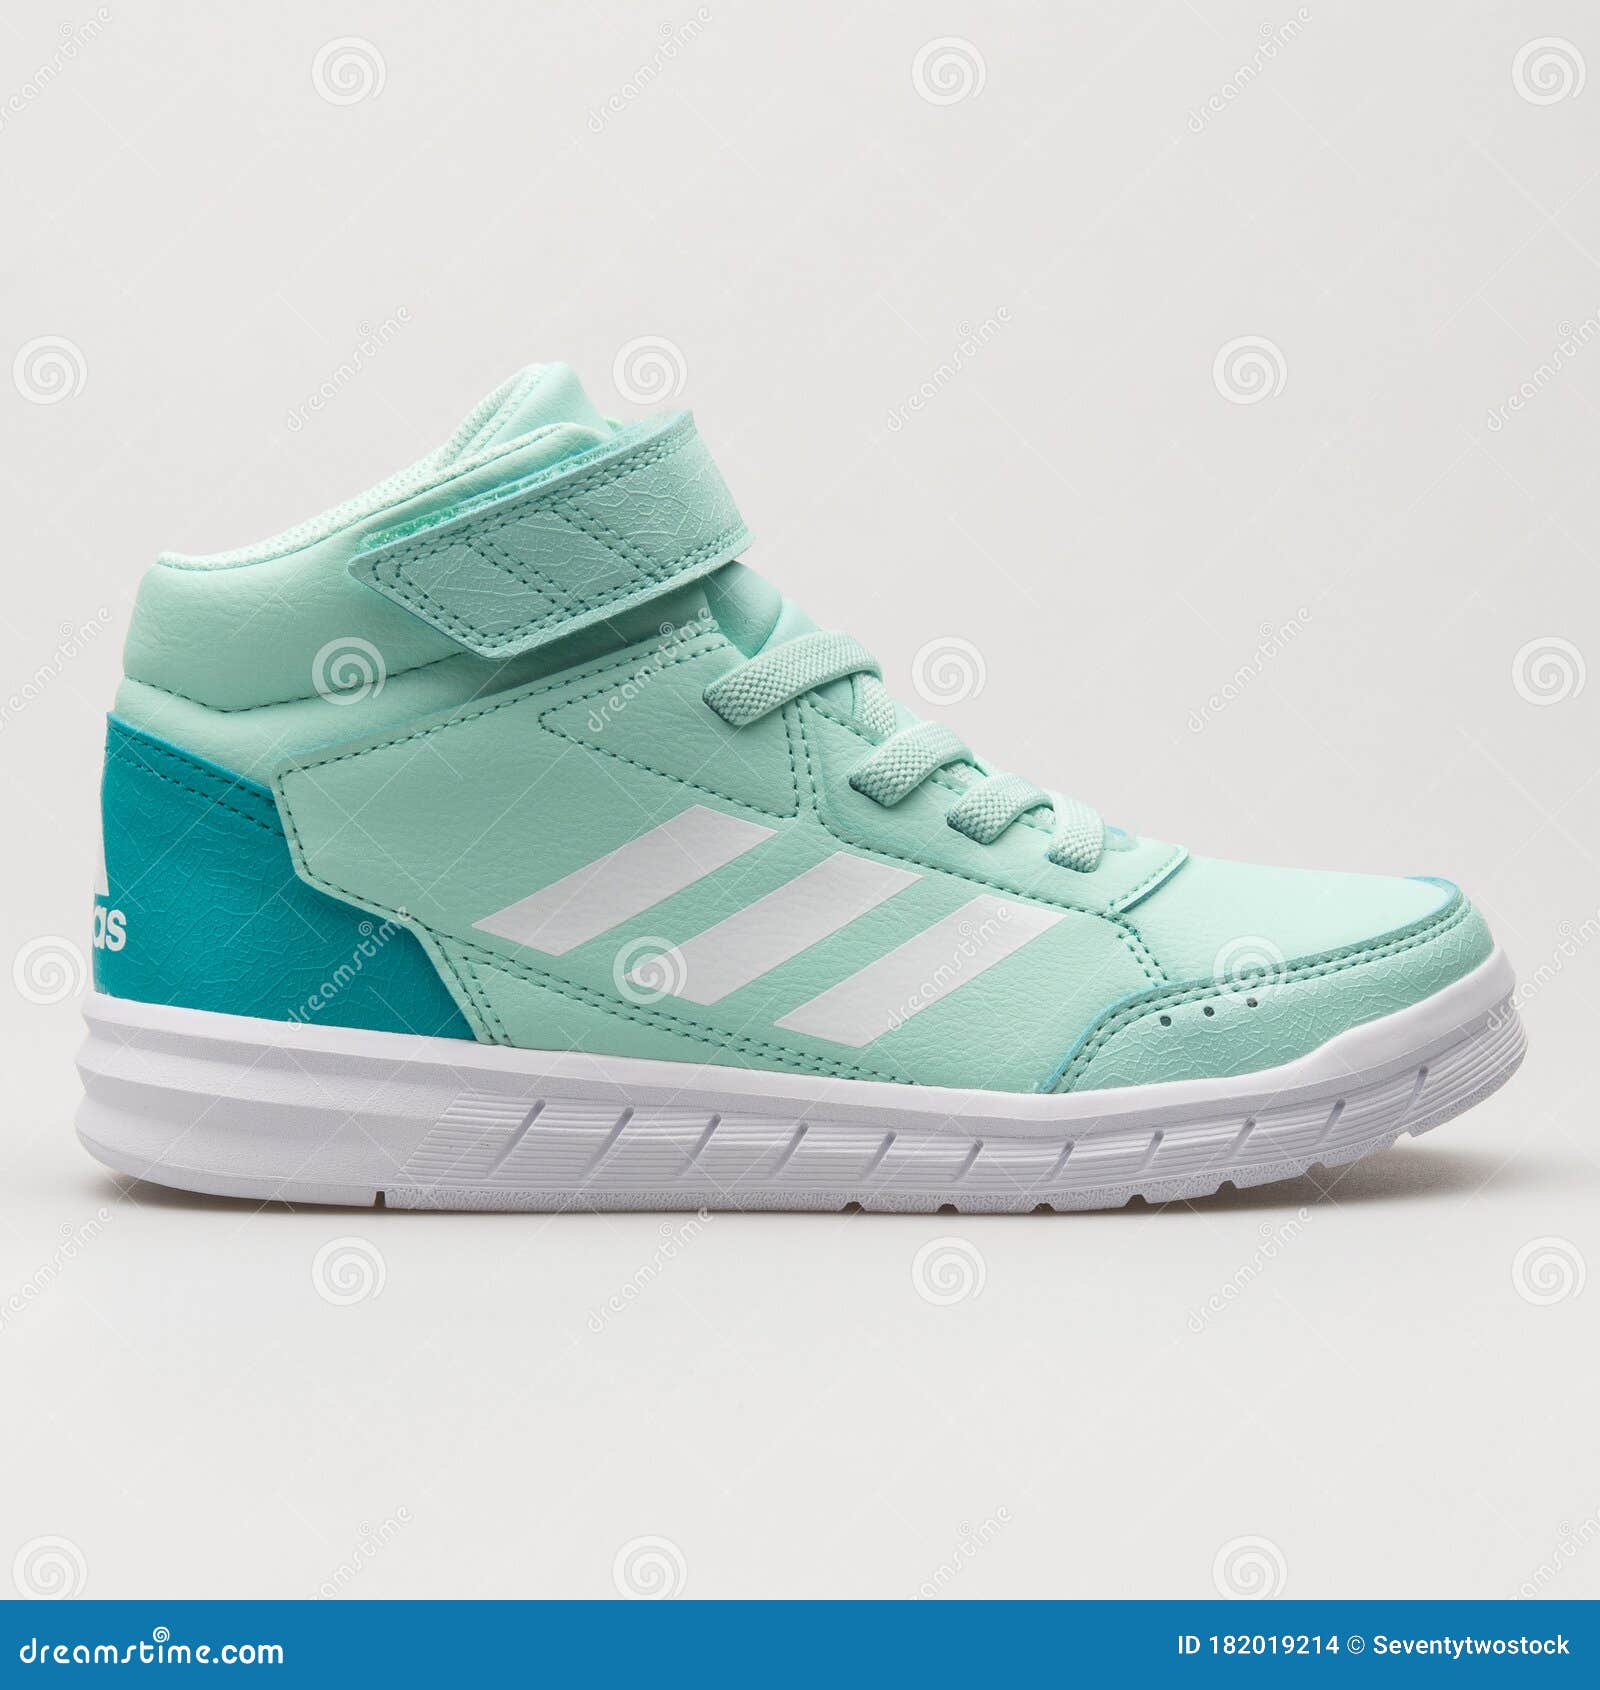 Theory of relativity Ongoing Pakistan Adidas AltaSport Mid EL Green and White Sneaker Editorial Stock Image -  Image of kids, side: 182019214